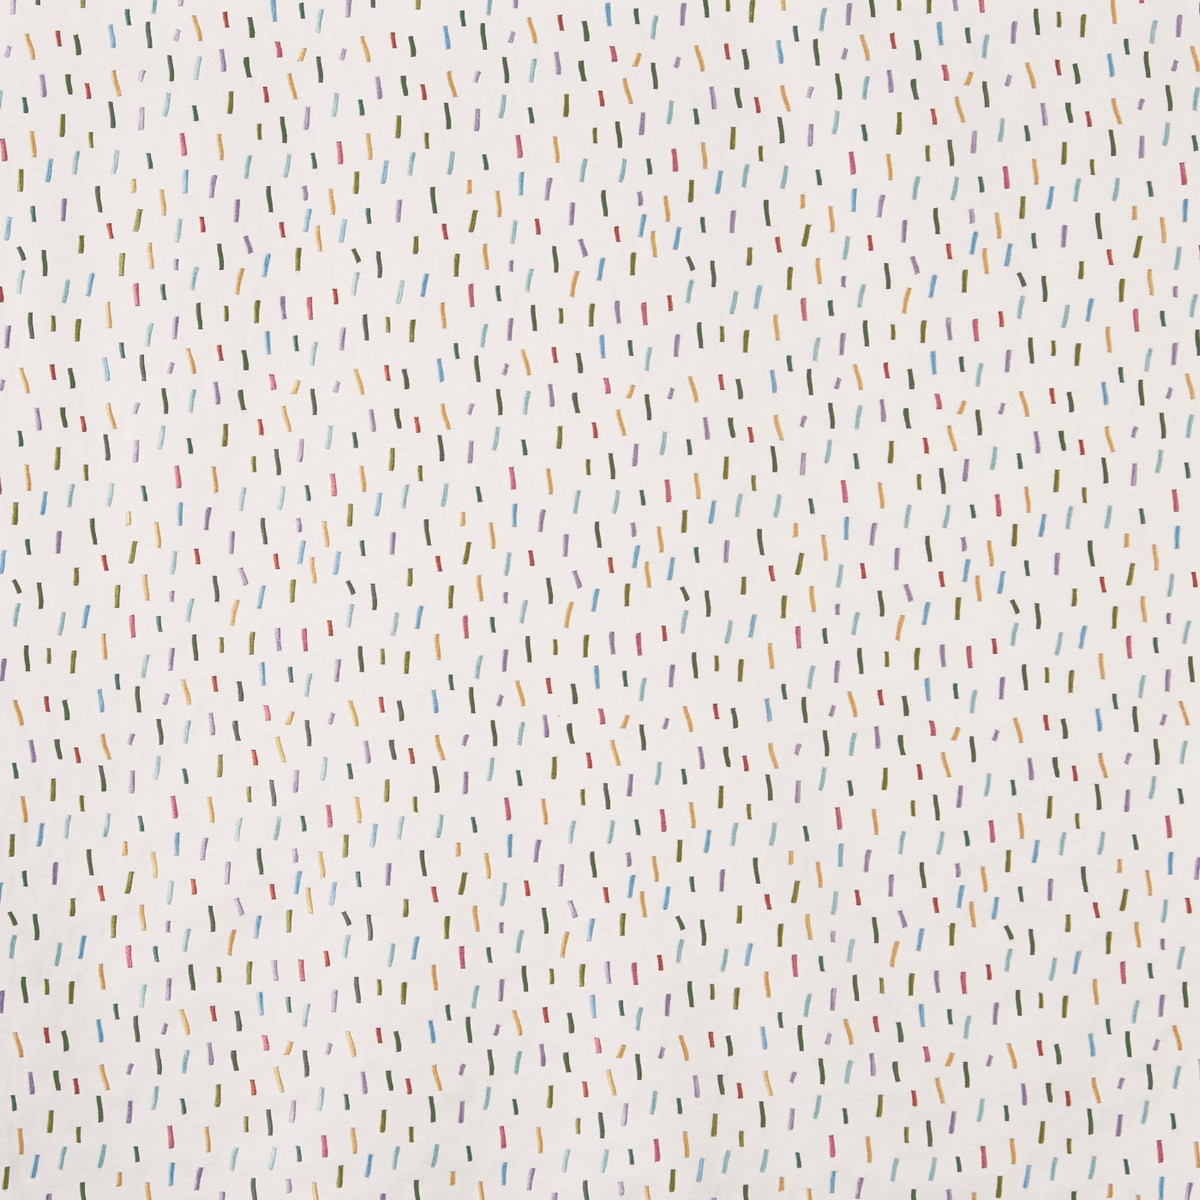 Dolly Mixture Candyfloss Fabric by Prestigious Textiles